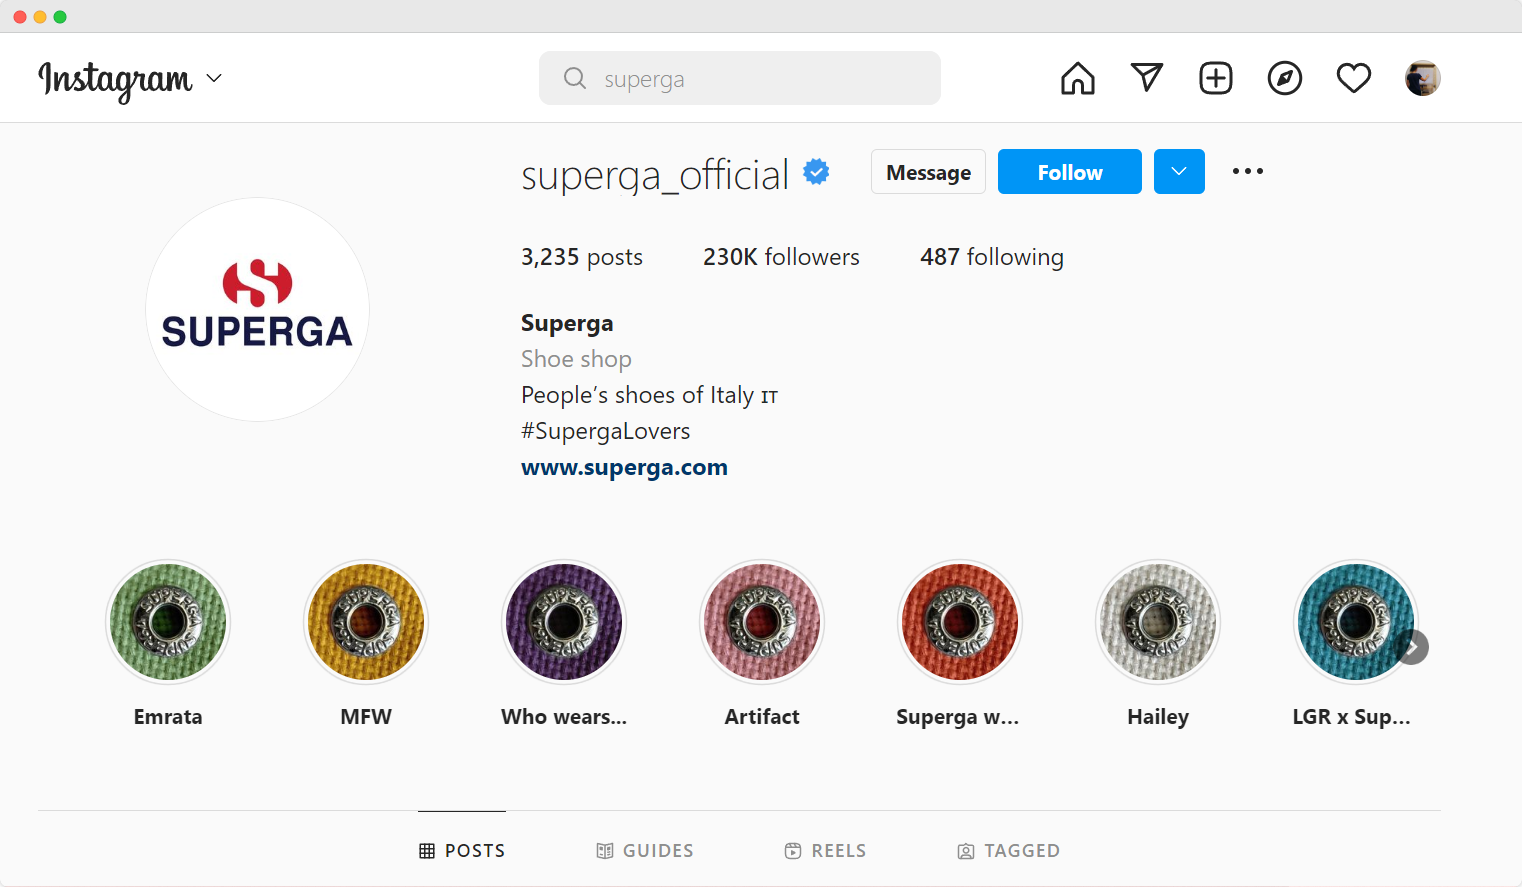 Superga Instagram profile highlights covers